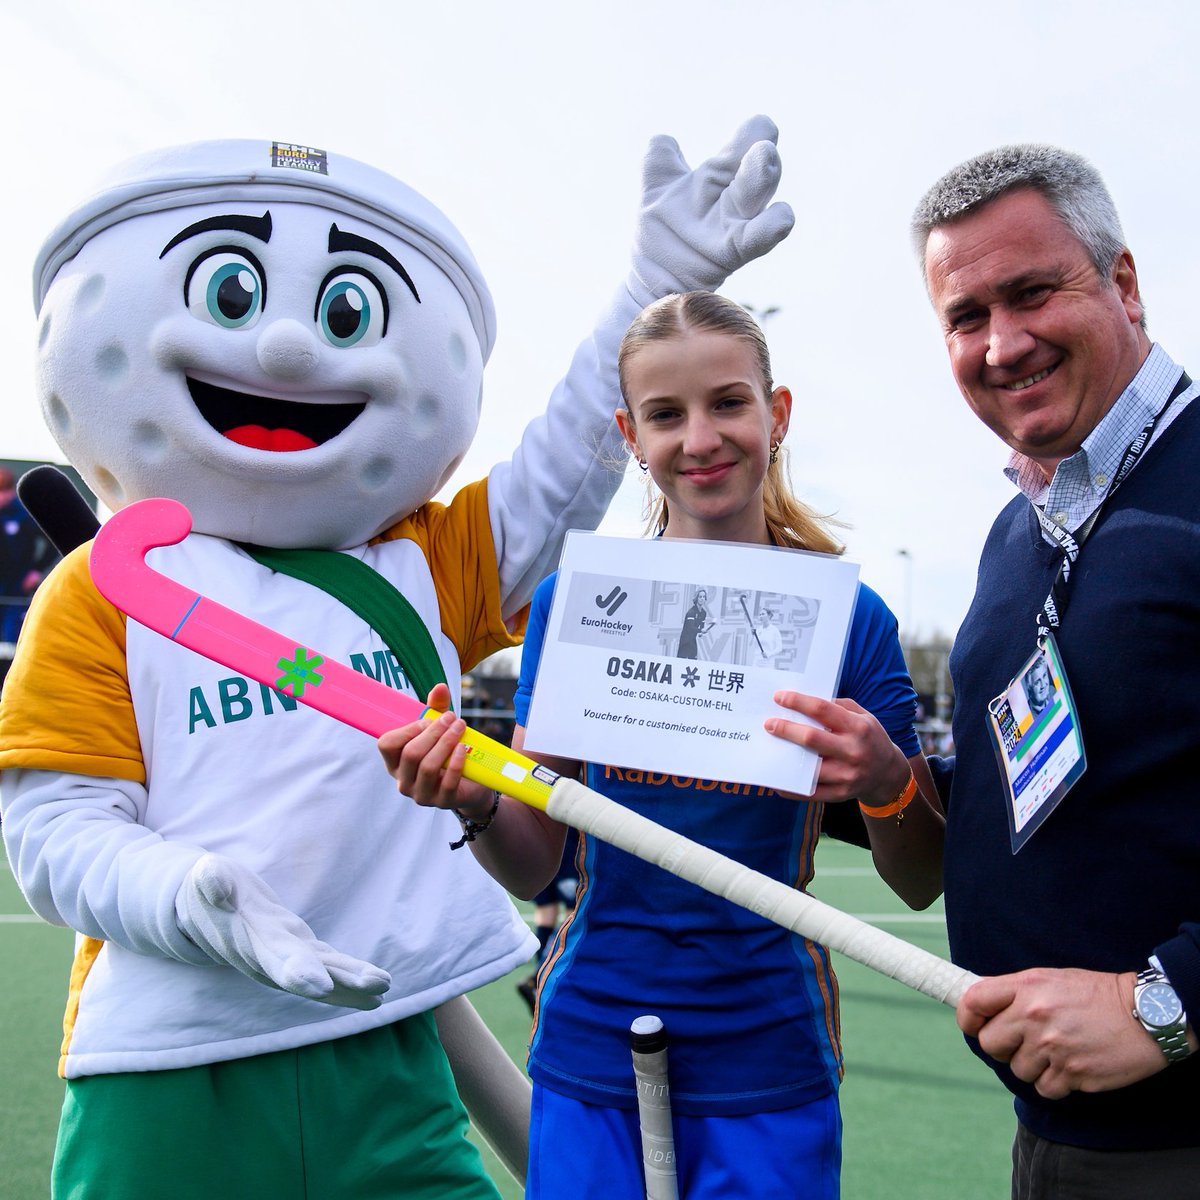 EuroHockey Freestyle makes its pledge for International Hockey Day The first @eurohockeyorg Freestyle launched spectacularly last week with over 5,500 fans marveling at the skills of the three finalists at the Wagener Stadium, Amsterdam. Read more here: bit.ly/49B0ljx